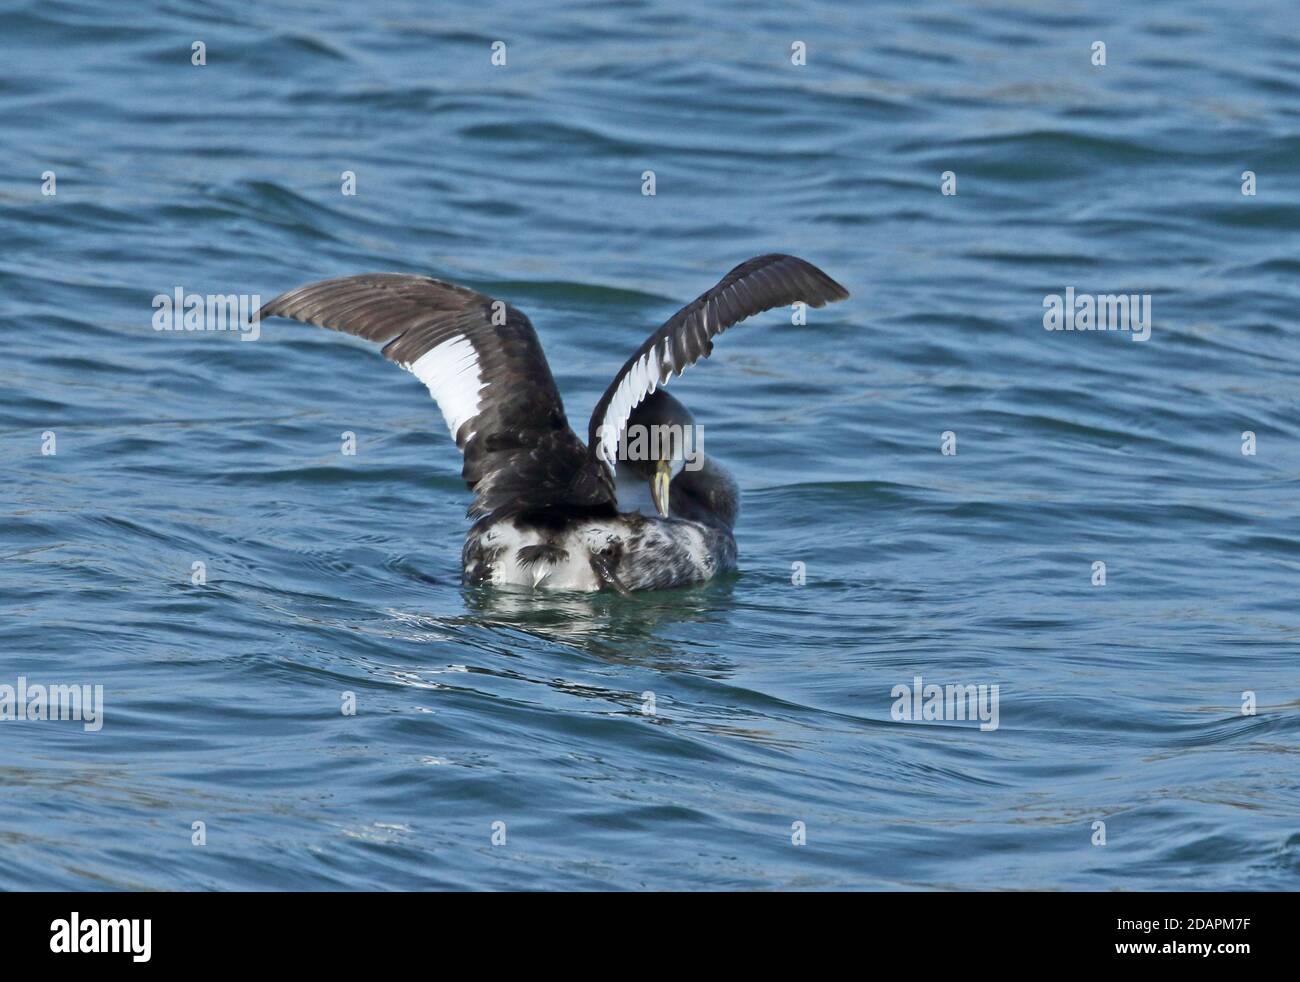 Red-necked Grebe (Podiceps grisegena holbollii) winter plumage adult swimming in harbour, preening  Choshi, Chiba Prefecture, Japan        February Stock Photo